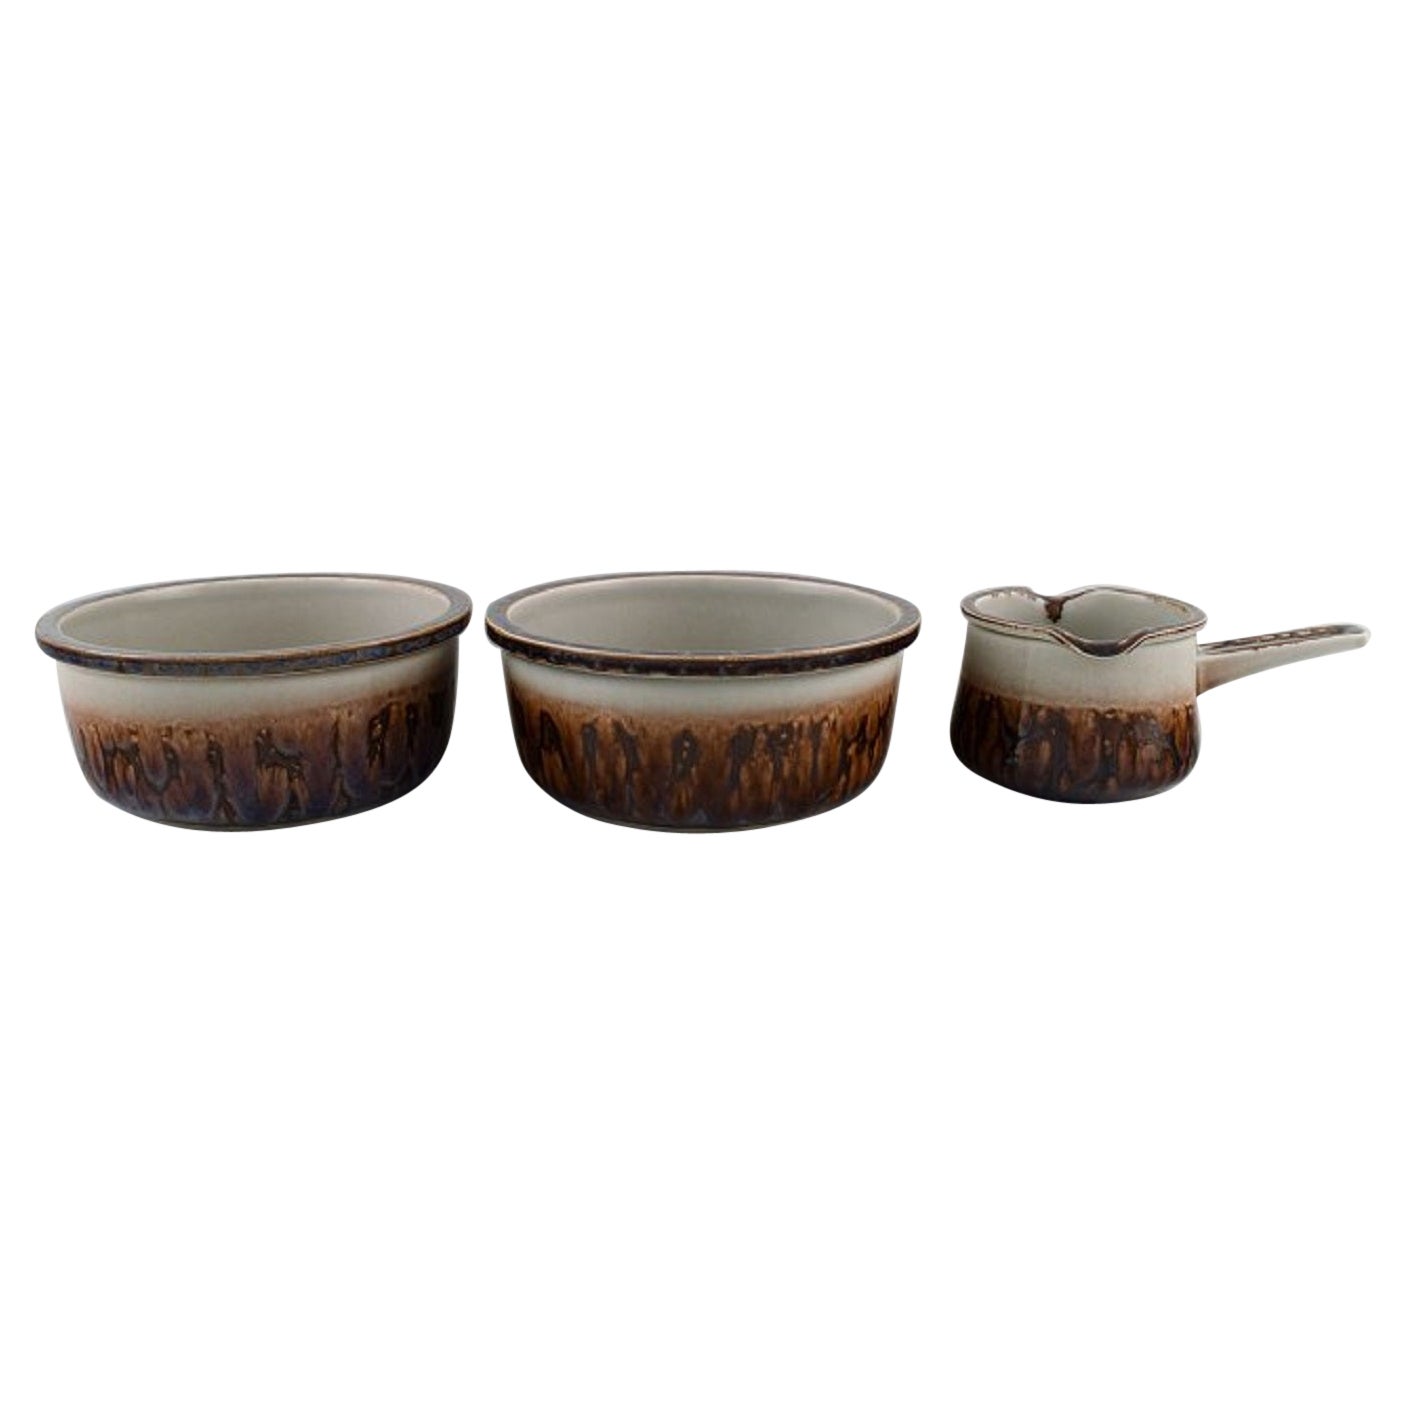 Bing & Grøndahl Mexico Dinner Service. Saucepan and Two Bowls in Stoneware For Sale